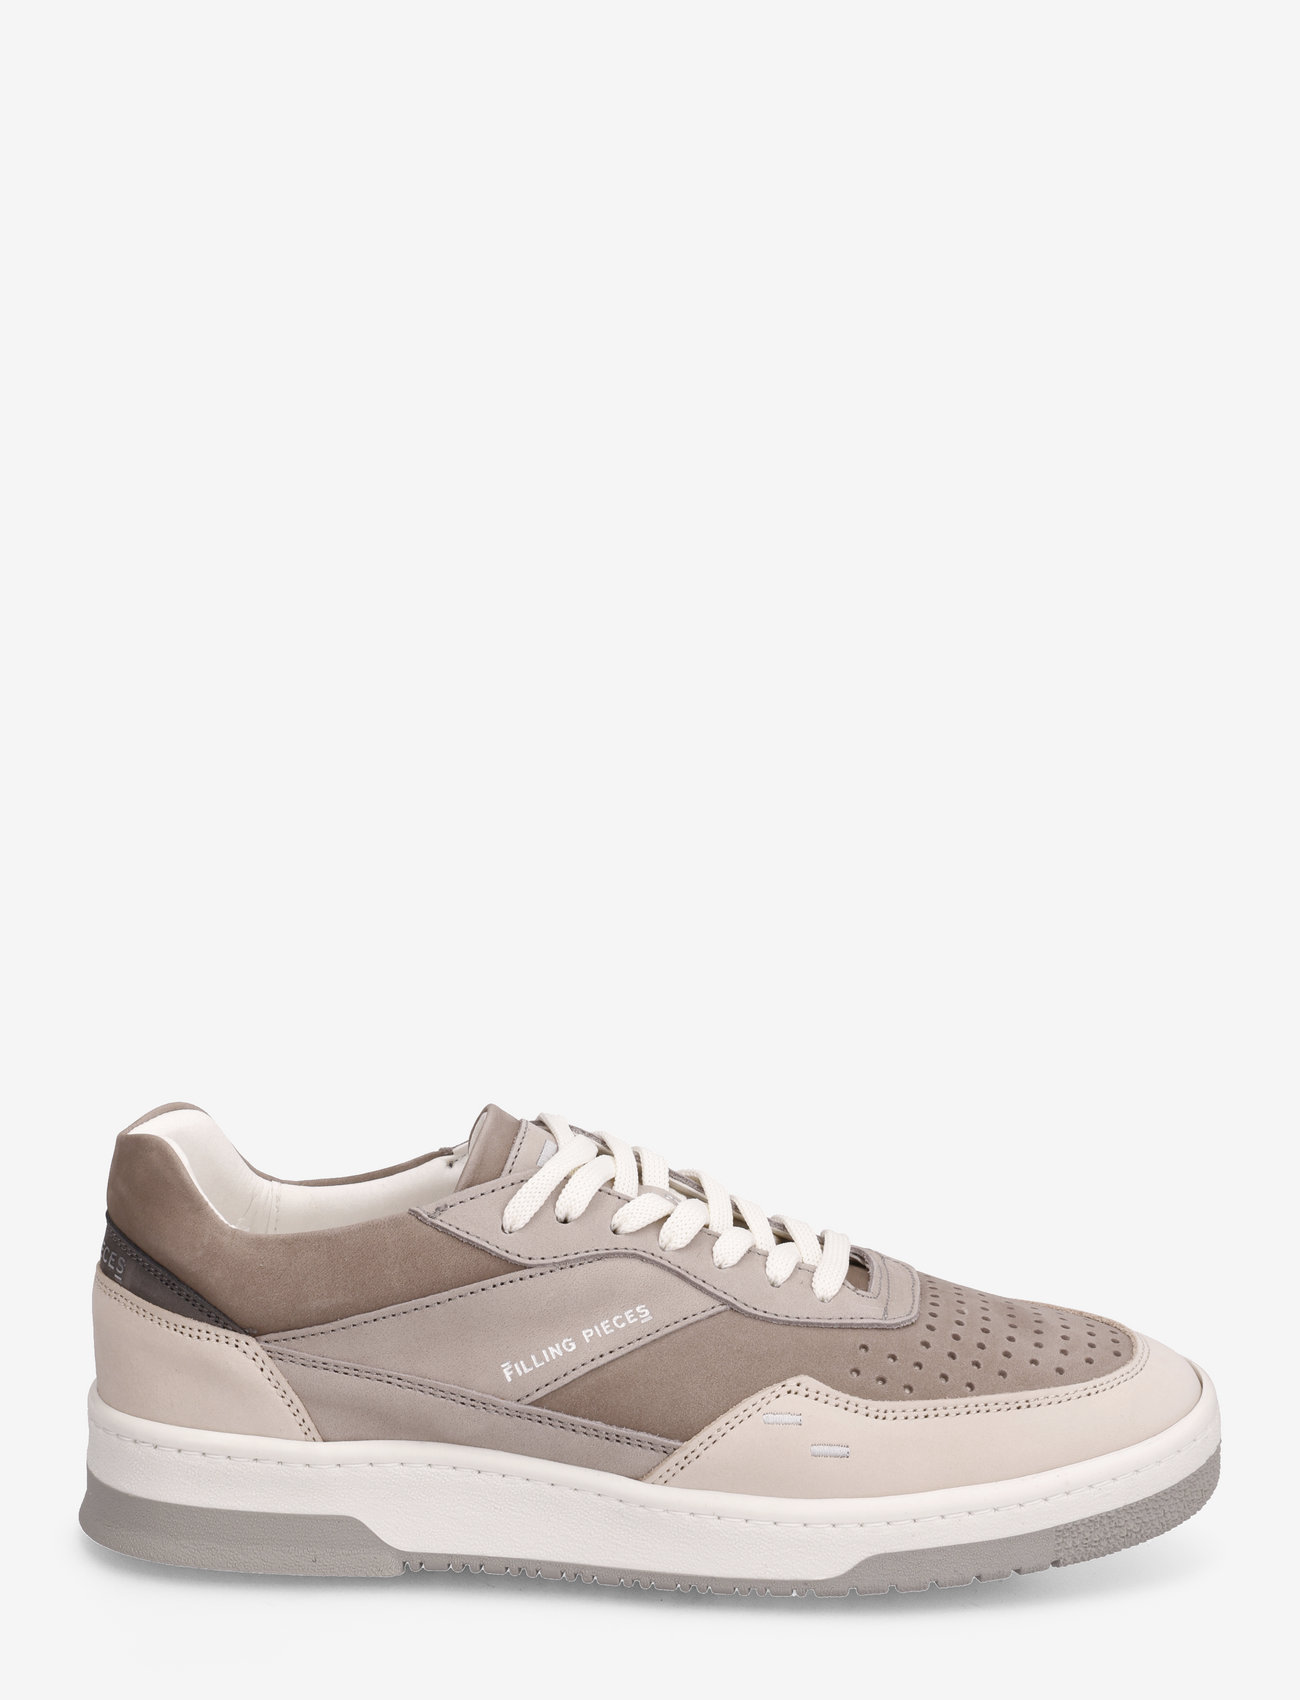 Filling Pieces - Ace Spin Light Grey - niedriger schnitt - taupe - 1